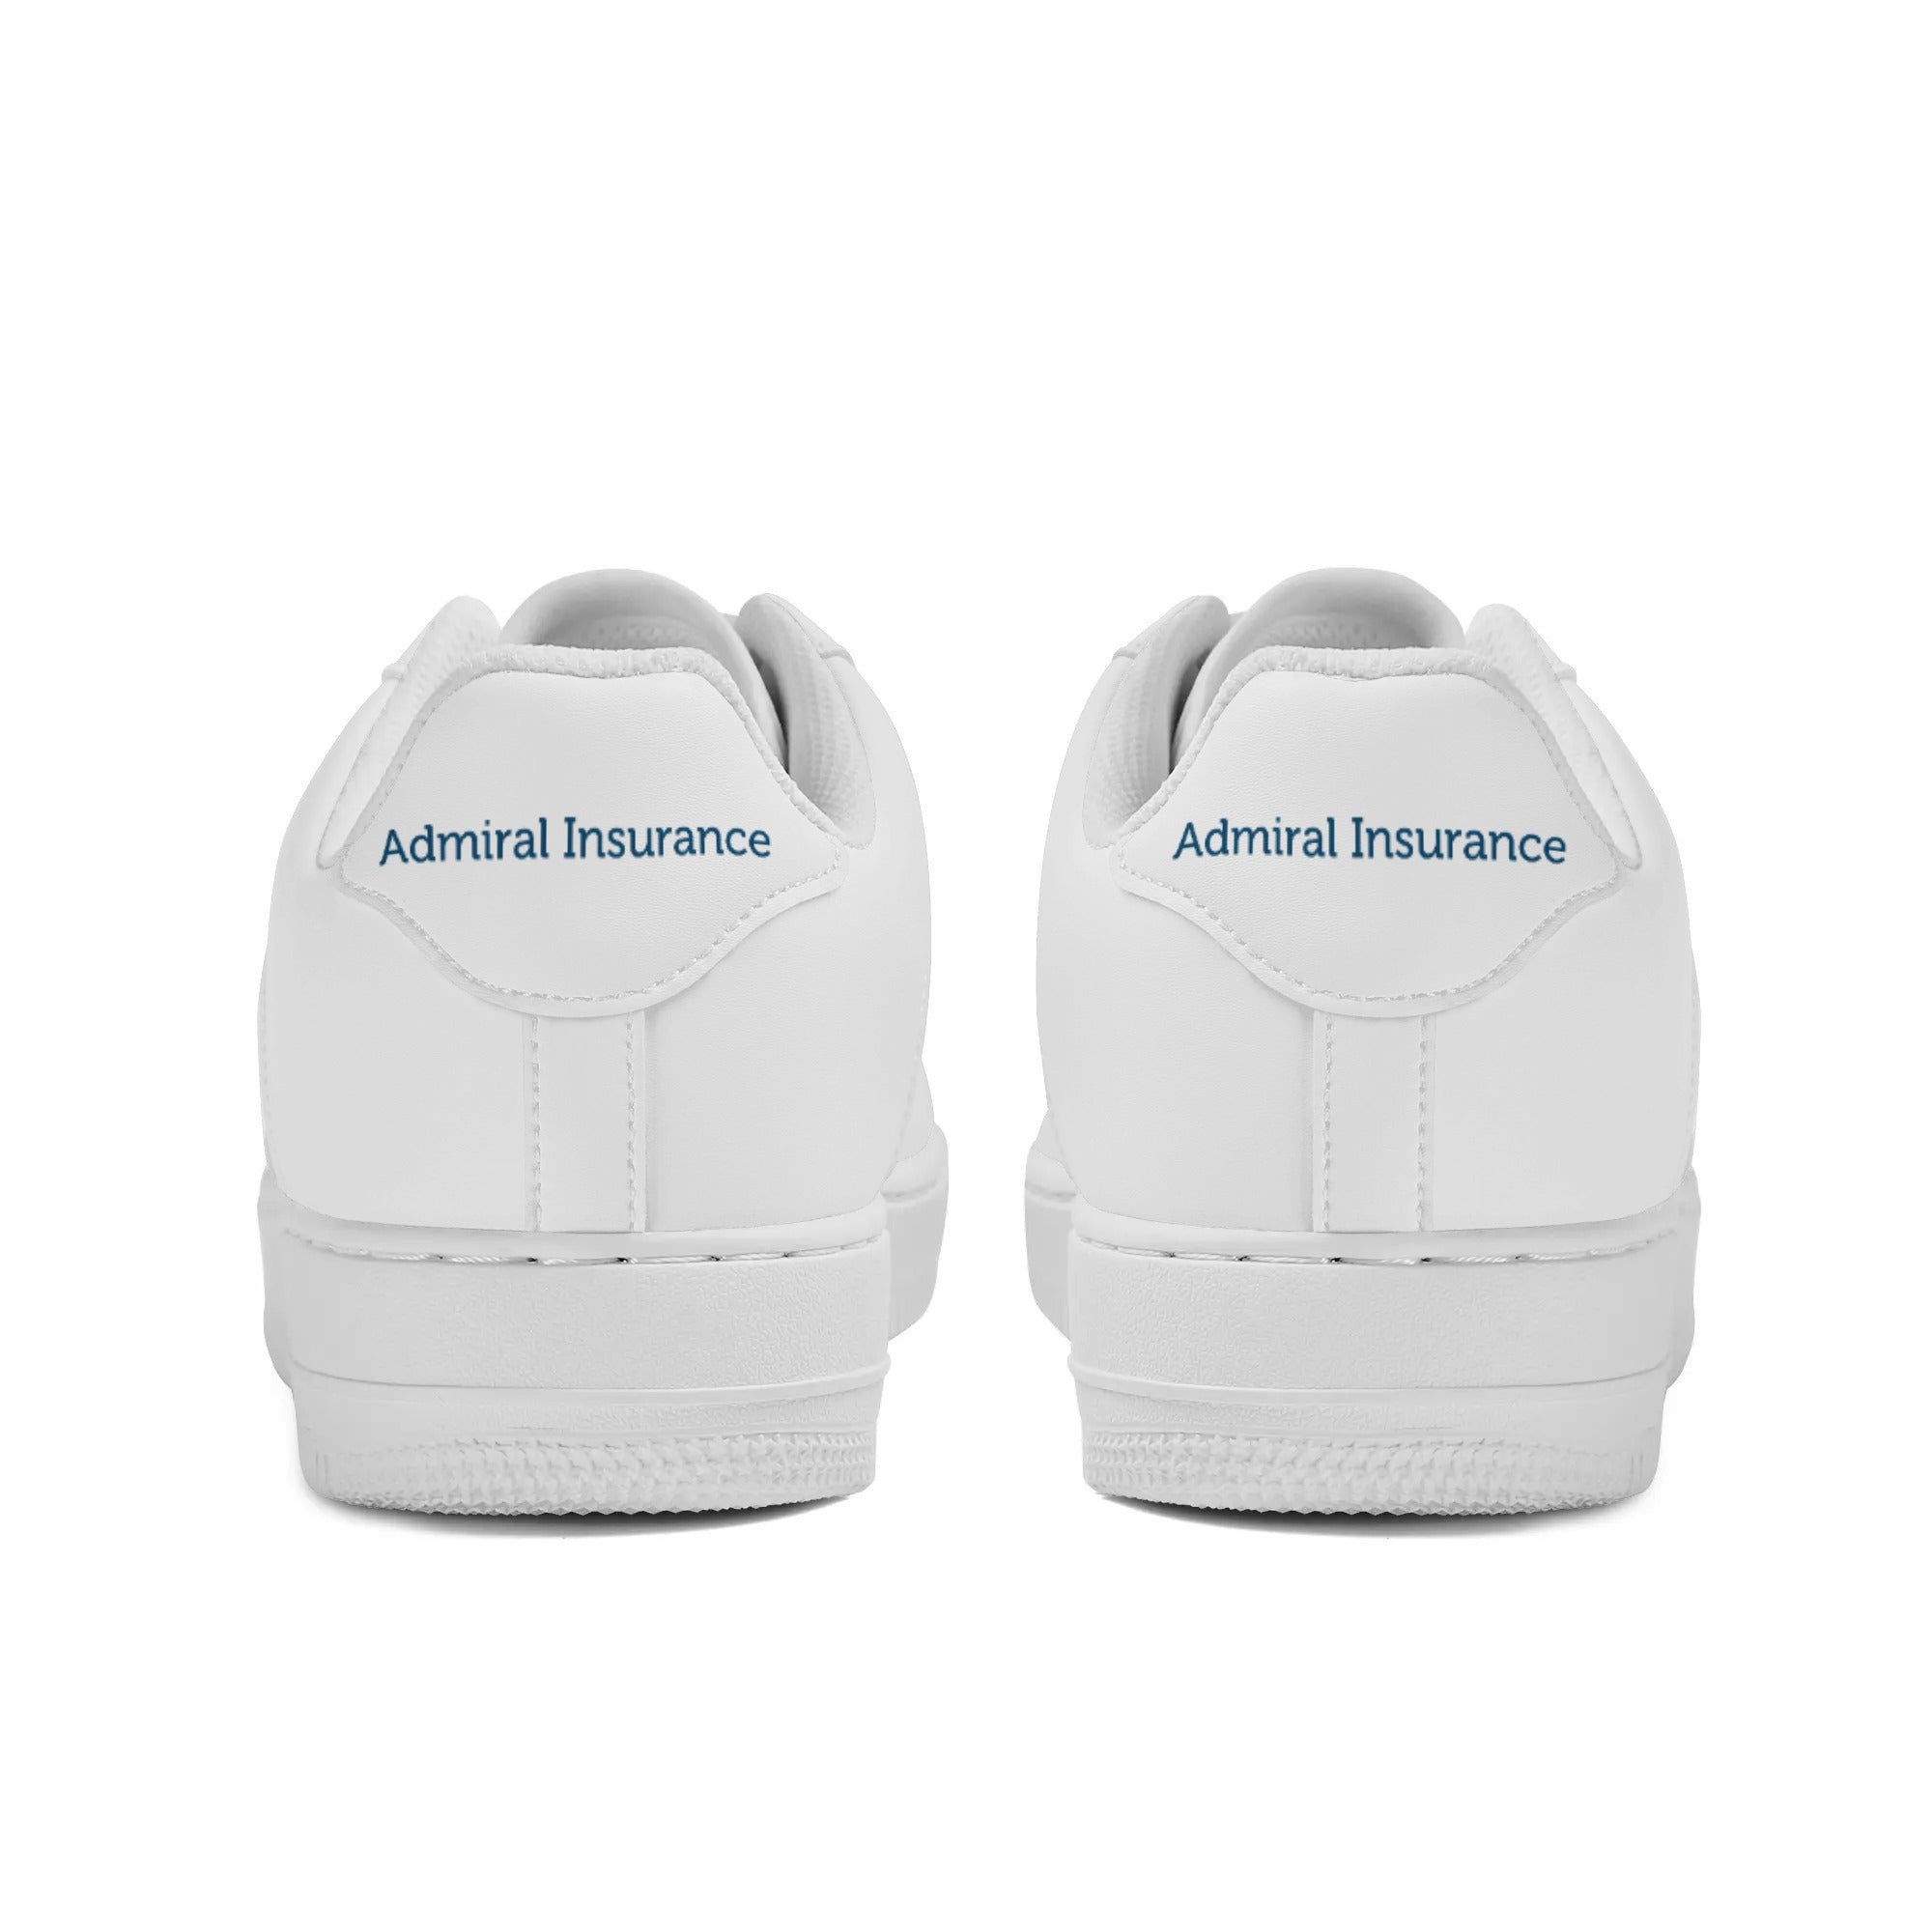 Admiral Insurance | Business Branded Customized Shoes | Shoe Zero